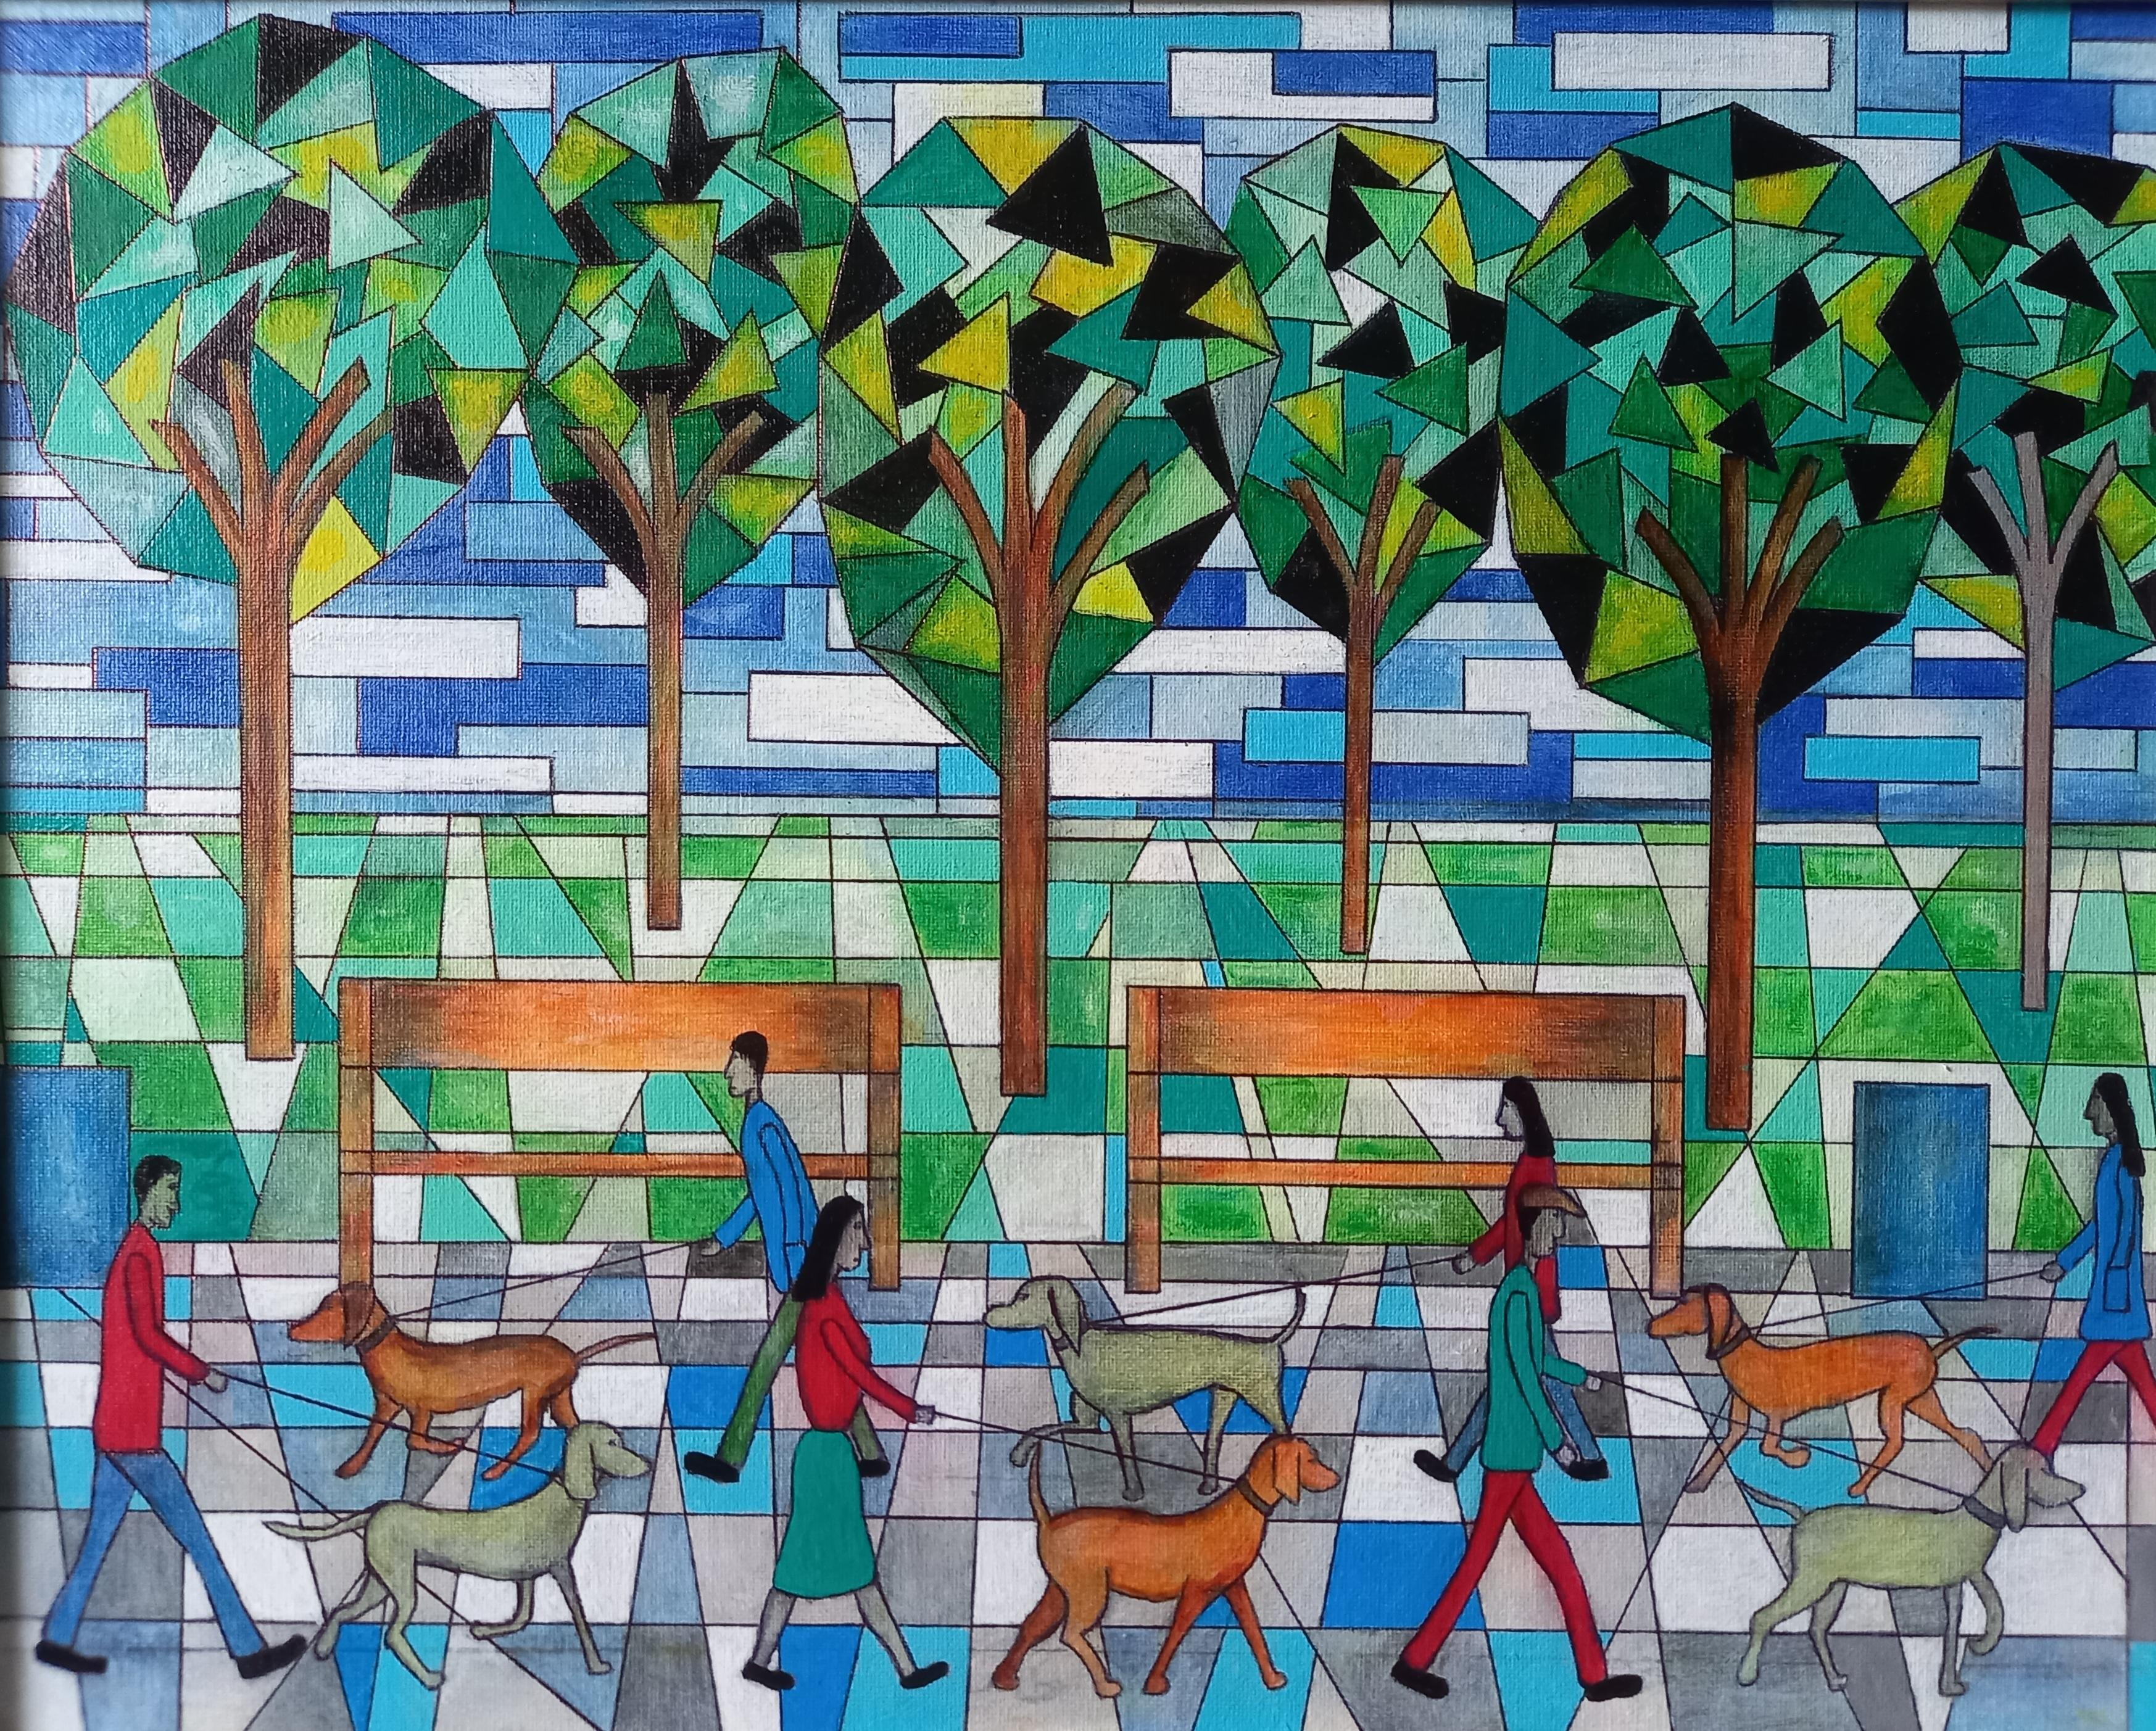 Out for a stroll with the dogs in the park.

Contemporary abstract oil on board by Christopher Barrow
Well Framed
Signed